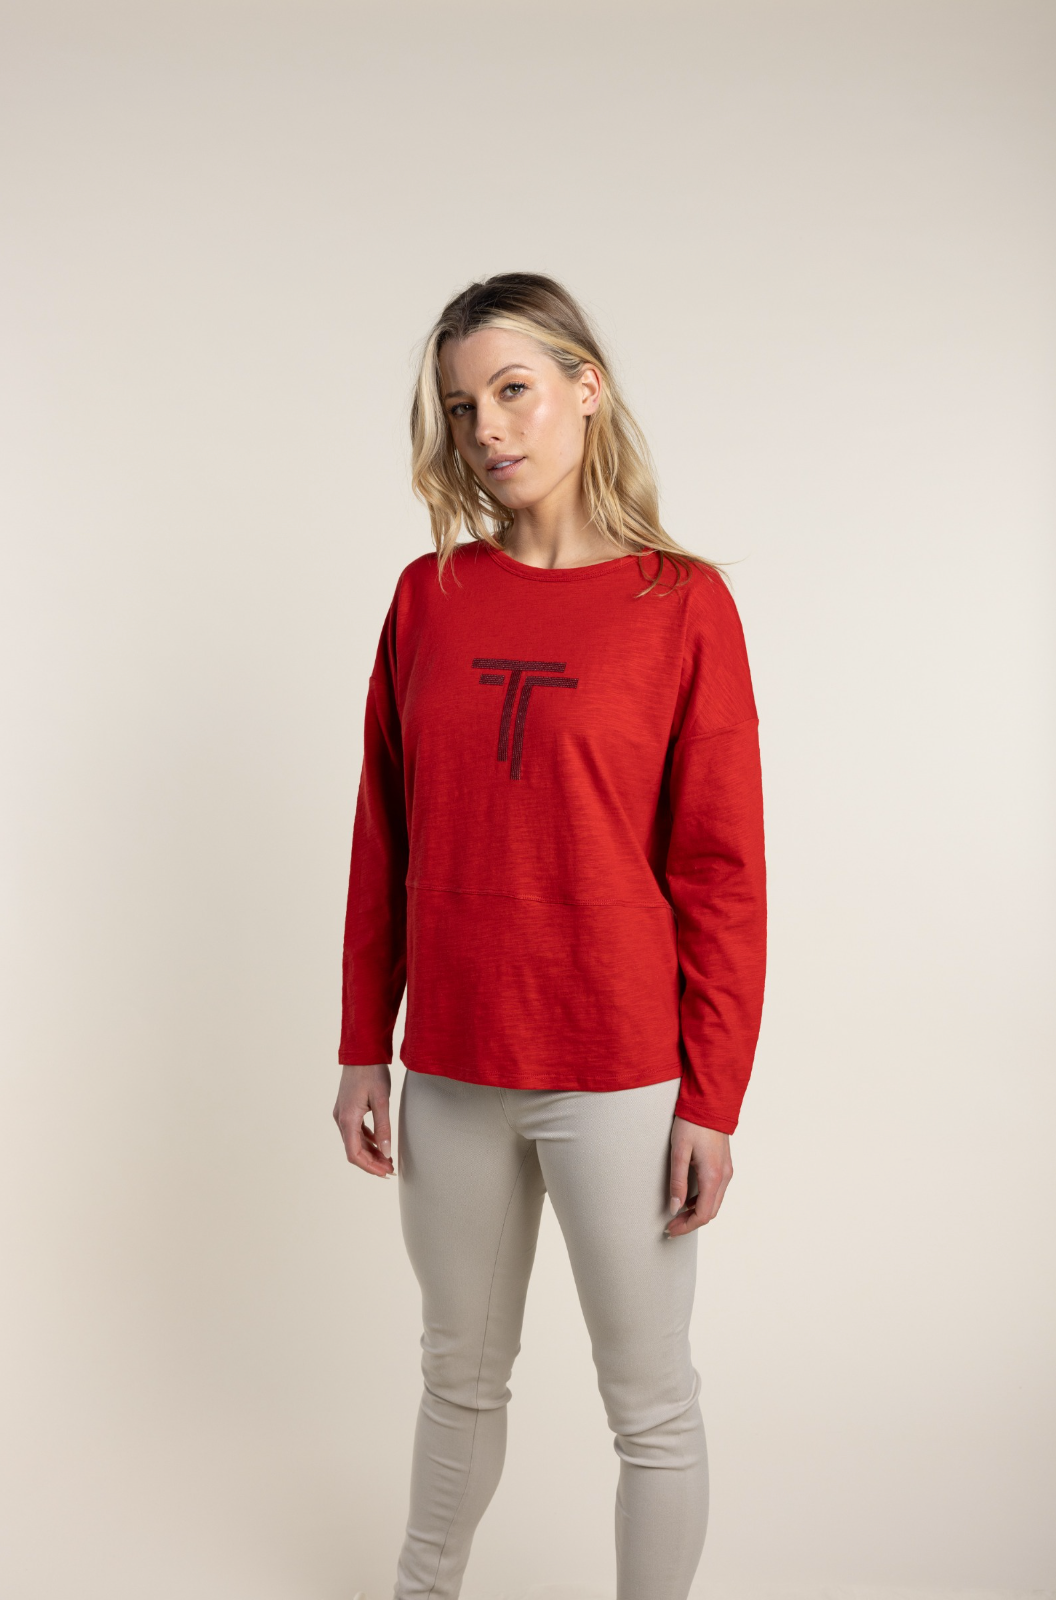 Two T's Sequin Trim Logo Tee in Red